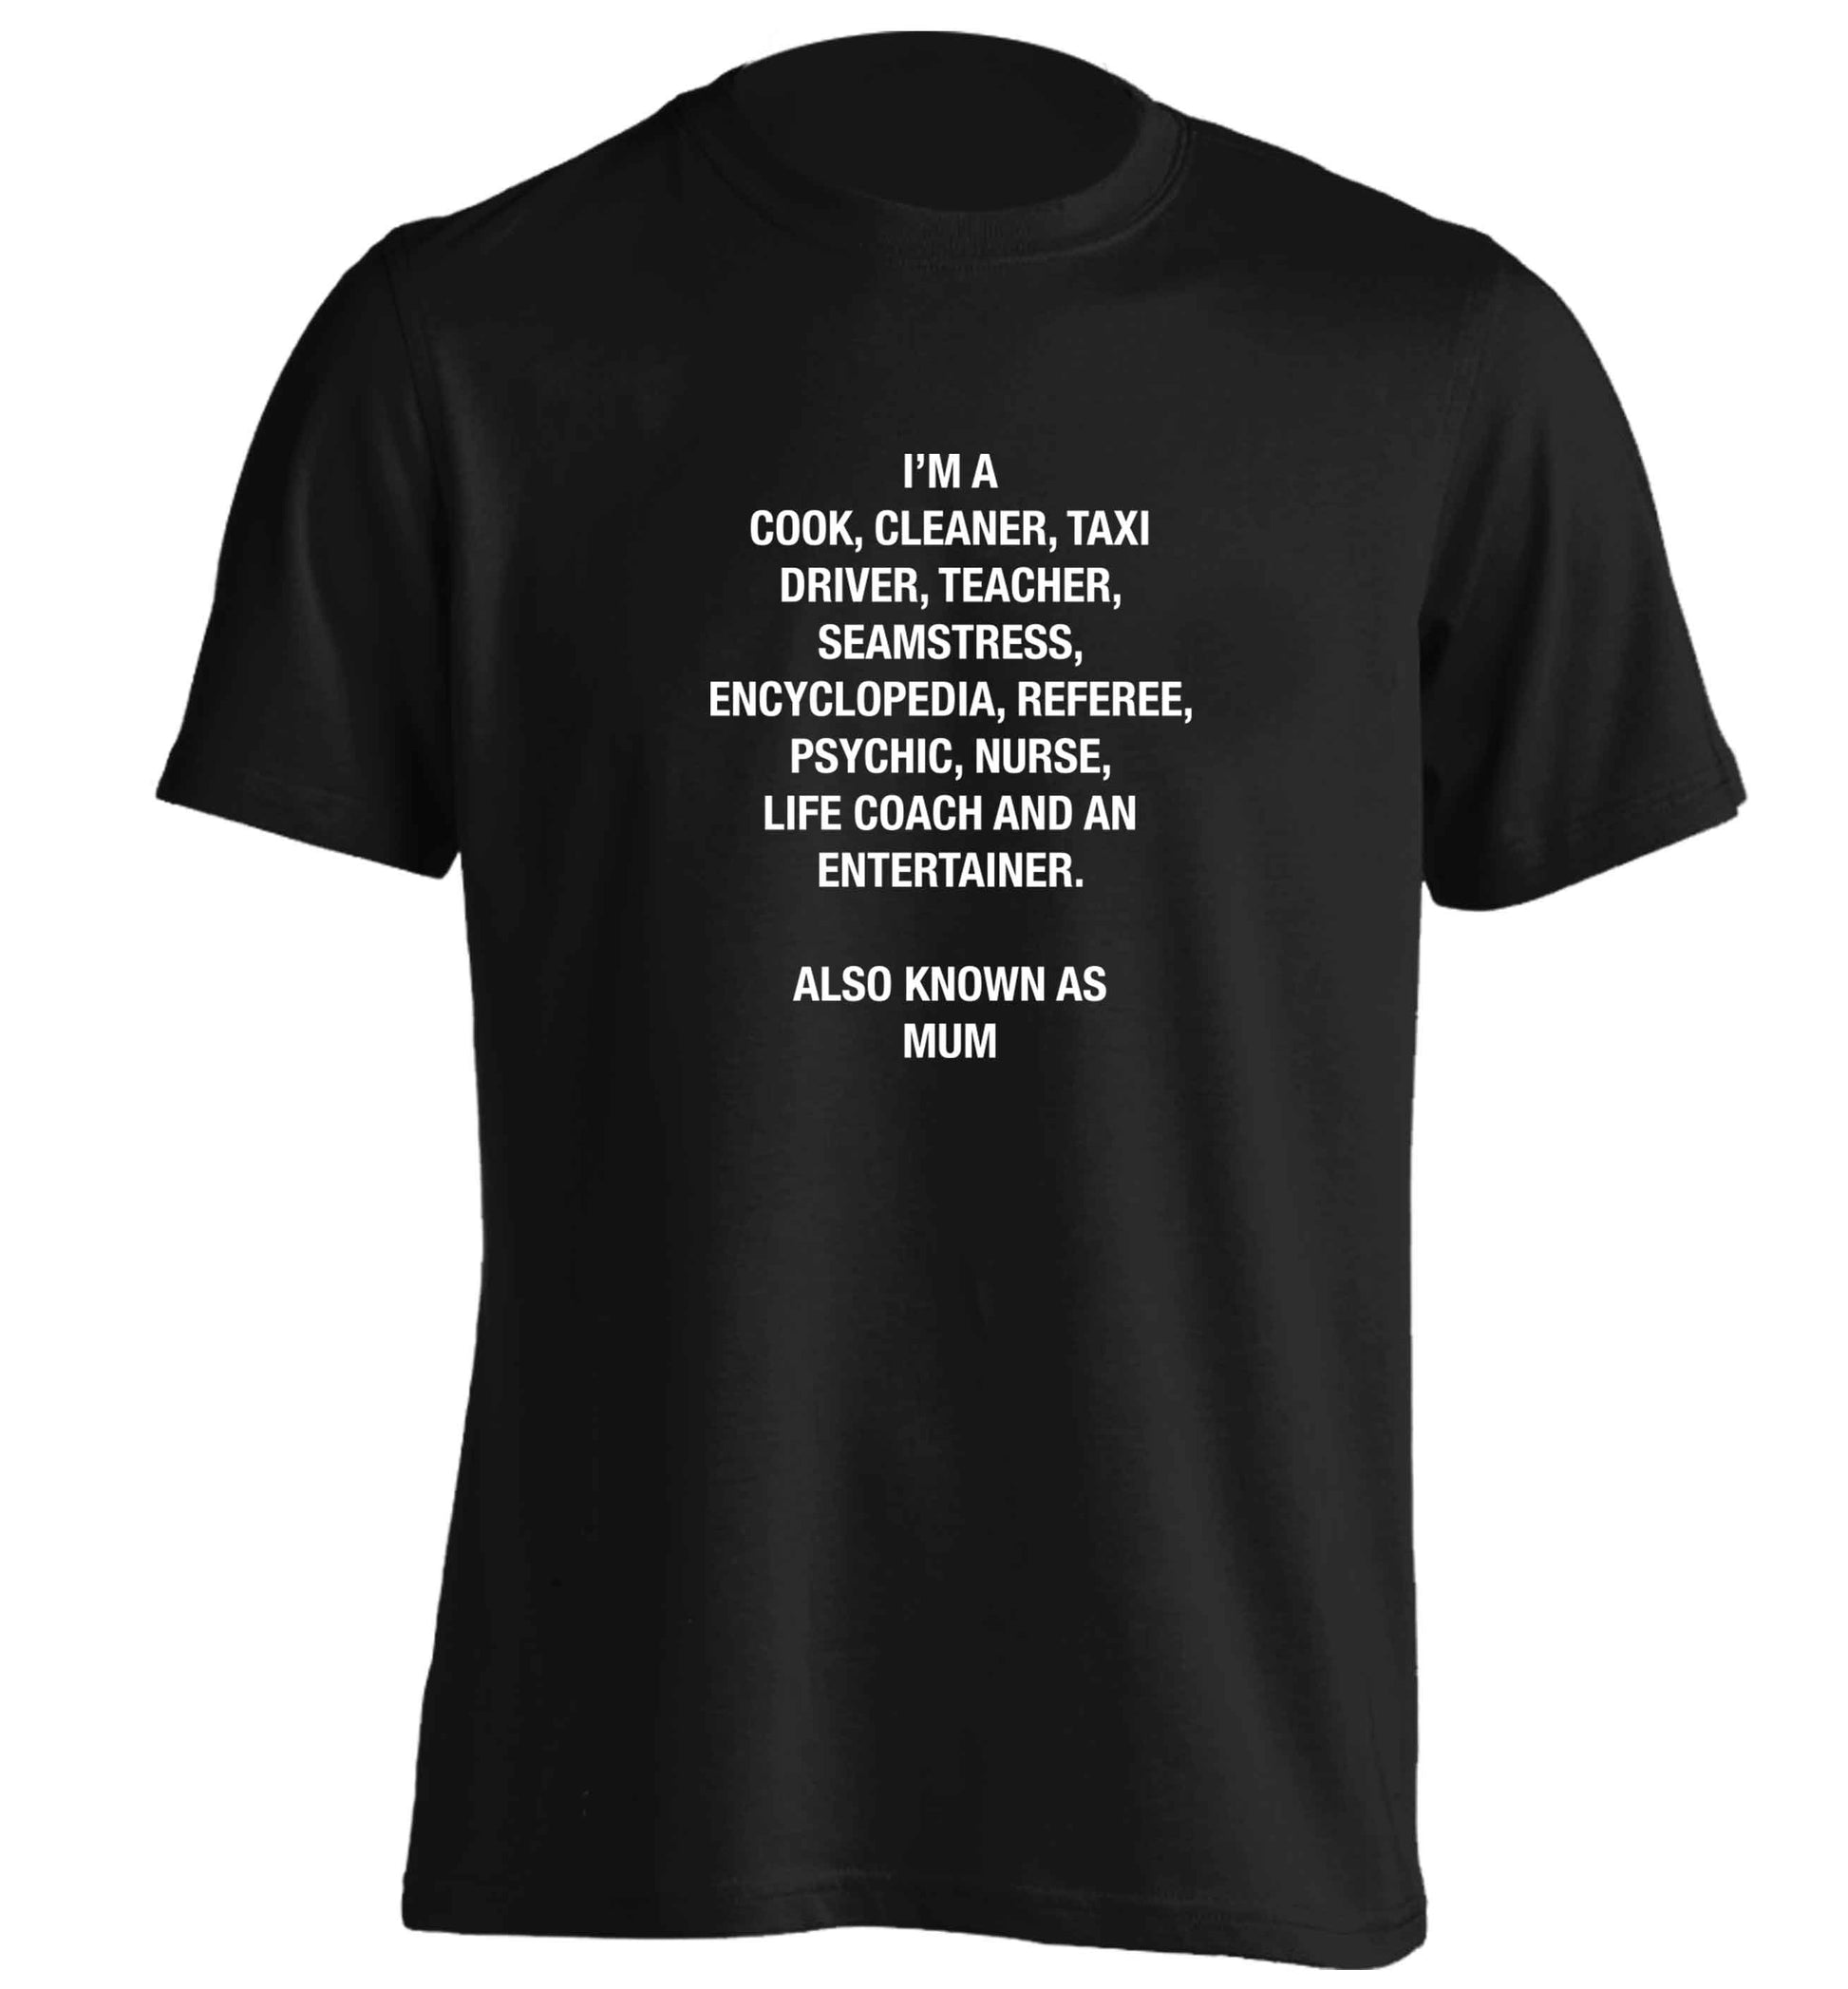 Funny gifts for your mum on mother's dayor her birthday! Mum, cook, cleaner, taxi driver, teacher, seamstress, encyclopedia, referee, psychic, nurse, life coach and entertainer adults unisex black Tshirt 2XL